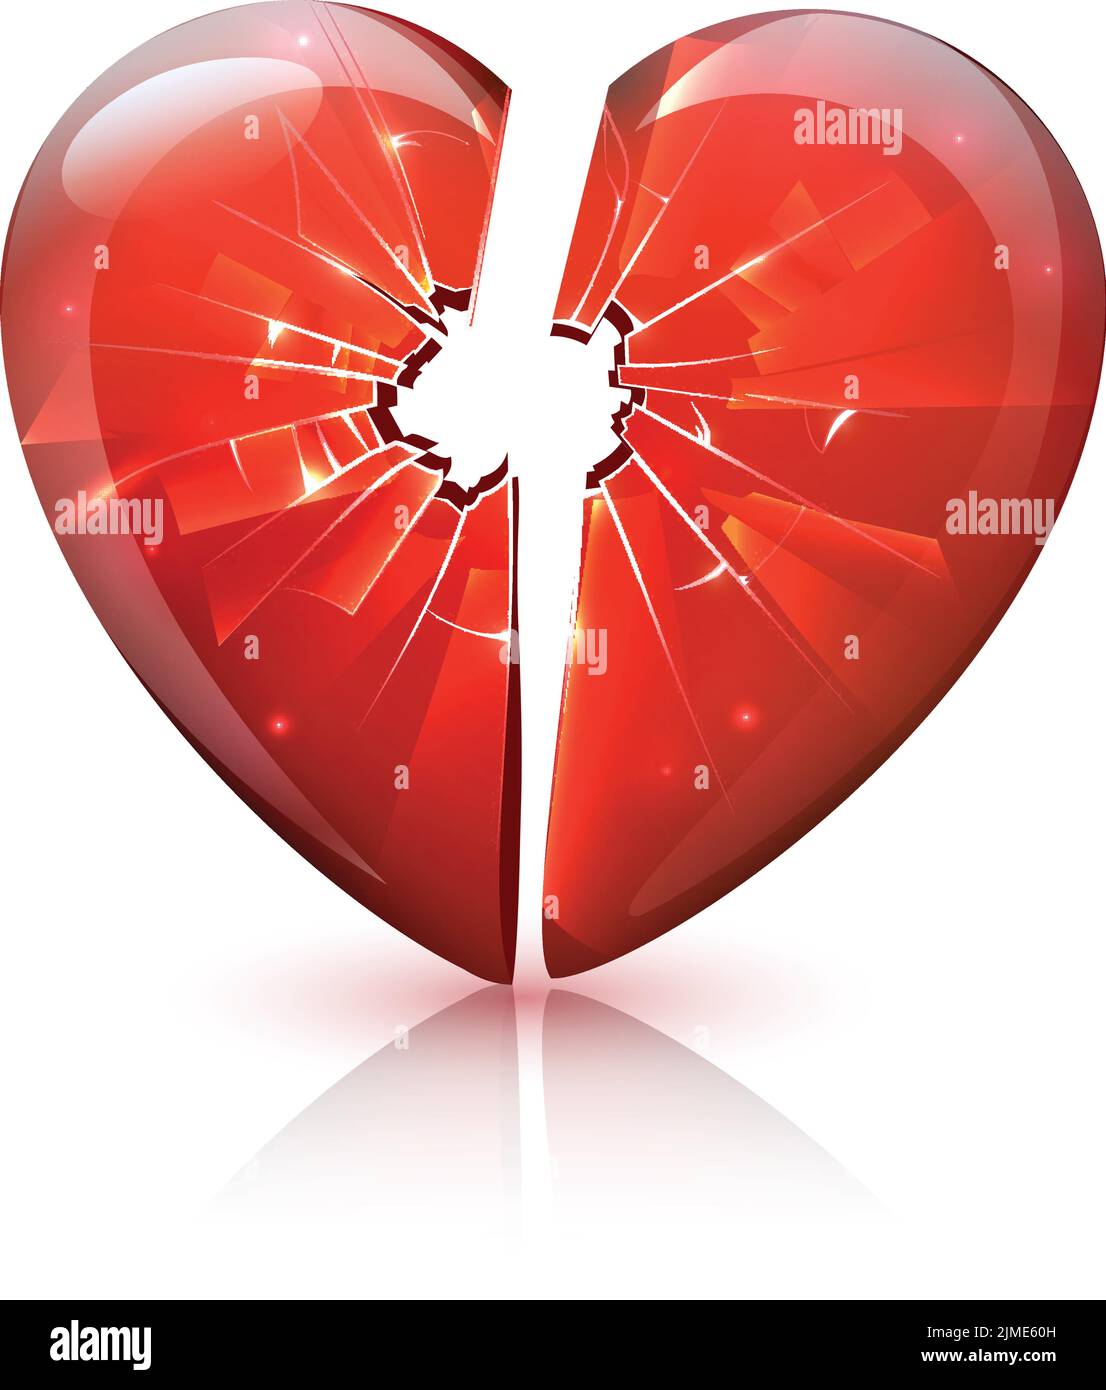 Broken red glossy plastic or glass heart symbol of love romance relations problems icon abstract vector illustration Stock Vector